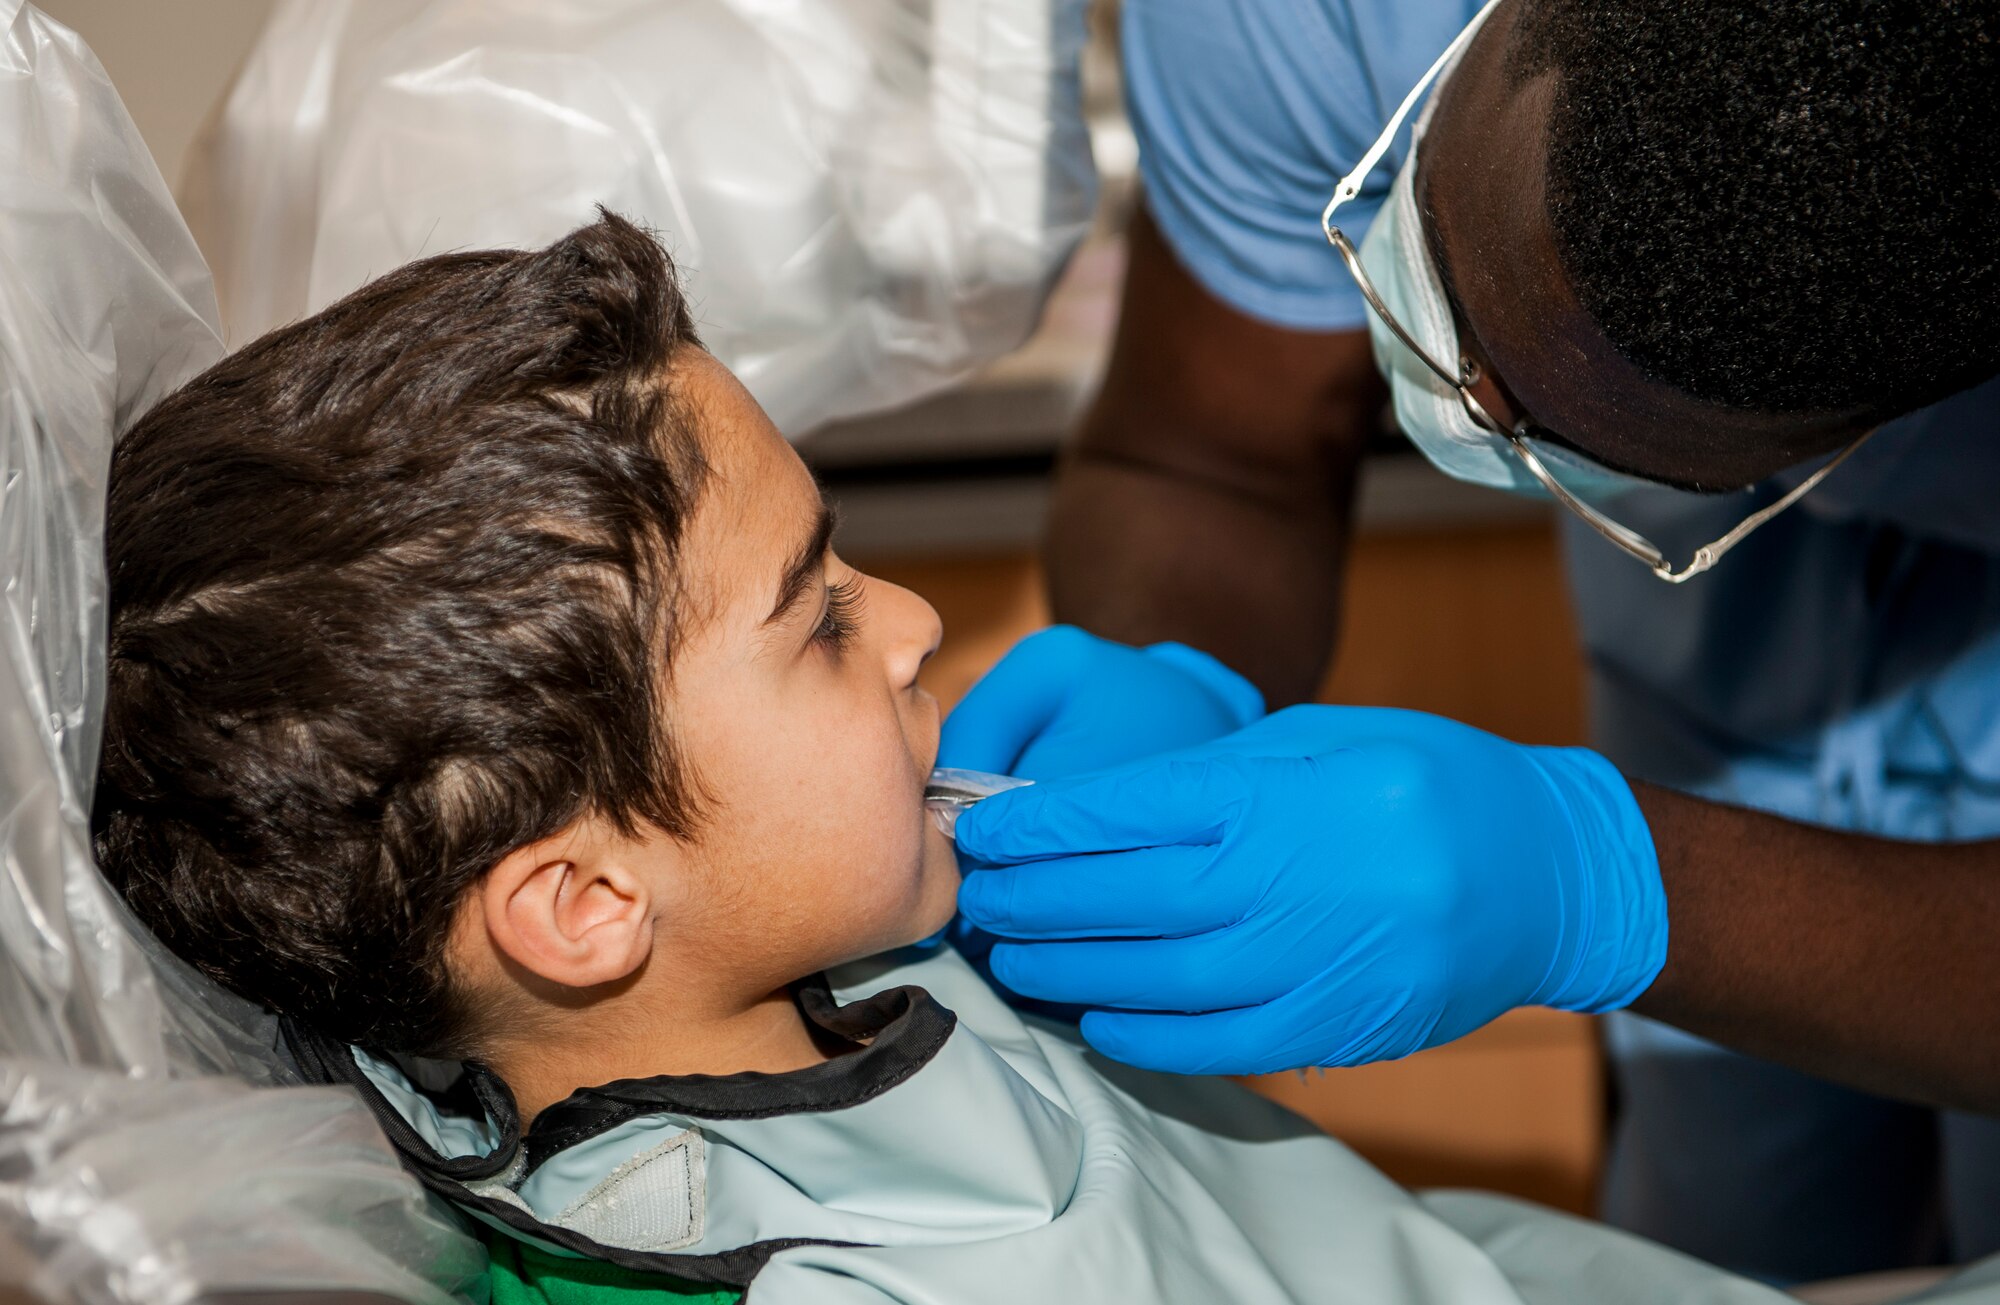 Ricardo Burgos-Mercado, son of U.S. Air Force Staff Sgt. Fernando Burgoz-Ortiz, Armed Forces Network operations manager, prepares to have an X-Ray taken of his teeth during the 52nd Dental Squadron’s semi-annual children’s walk-in at Spangdahlem Air Base, Germany, April 22, 2016. Aside from check-ups, dentists educate parents and children on proper oral hygiene to fight cavities and gingivitis. (U.S. Air Force photo by Airman 1st Class Timothy Kim/Released)